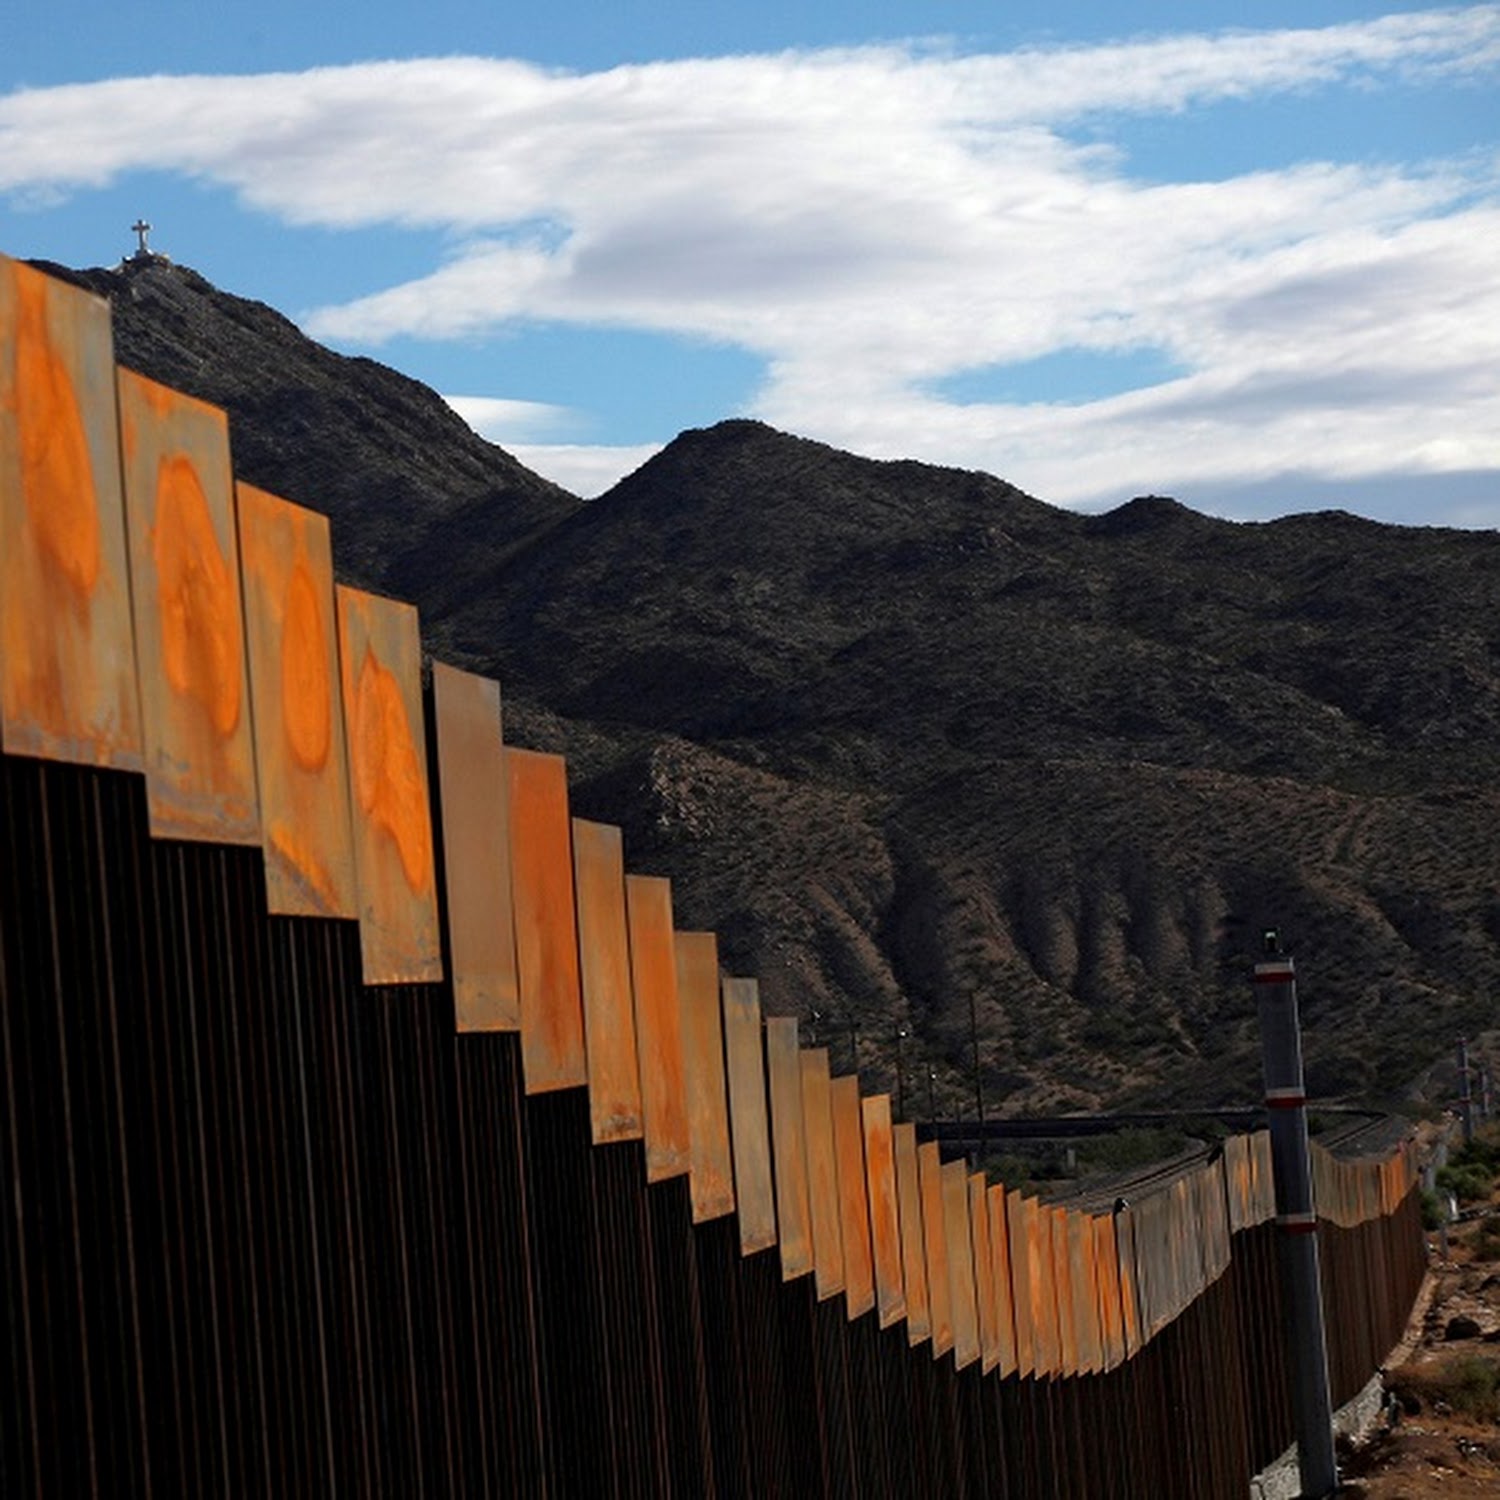 US-Mexico border is world's deadliest land migration route, IOM